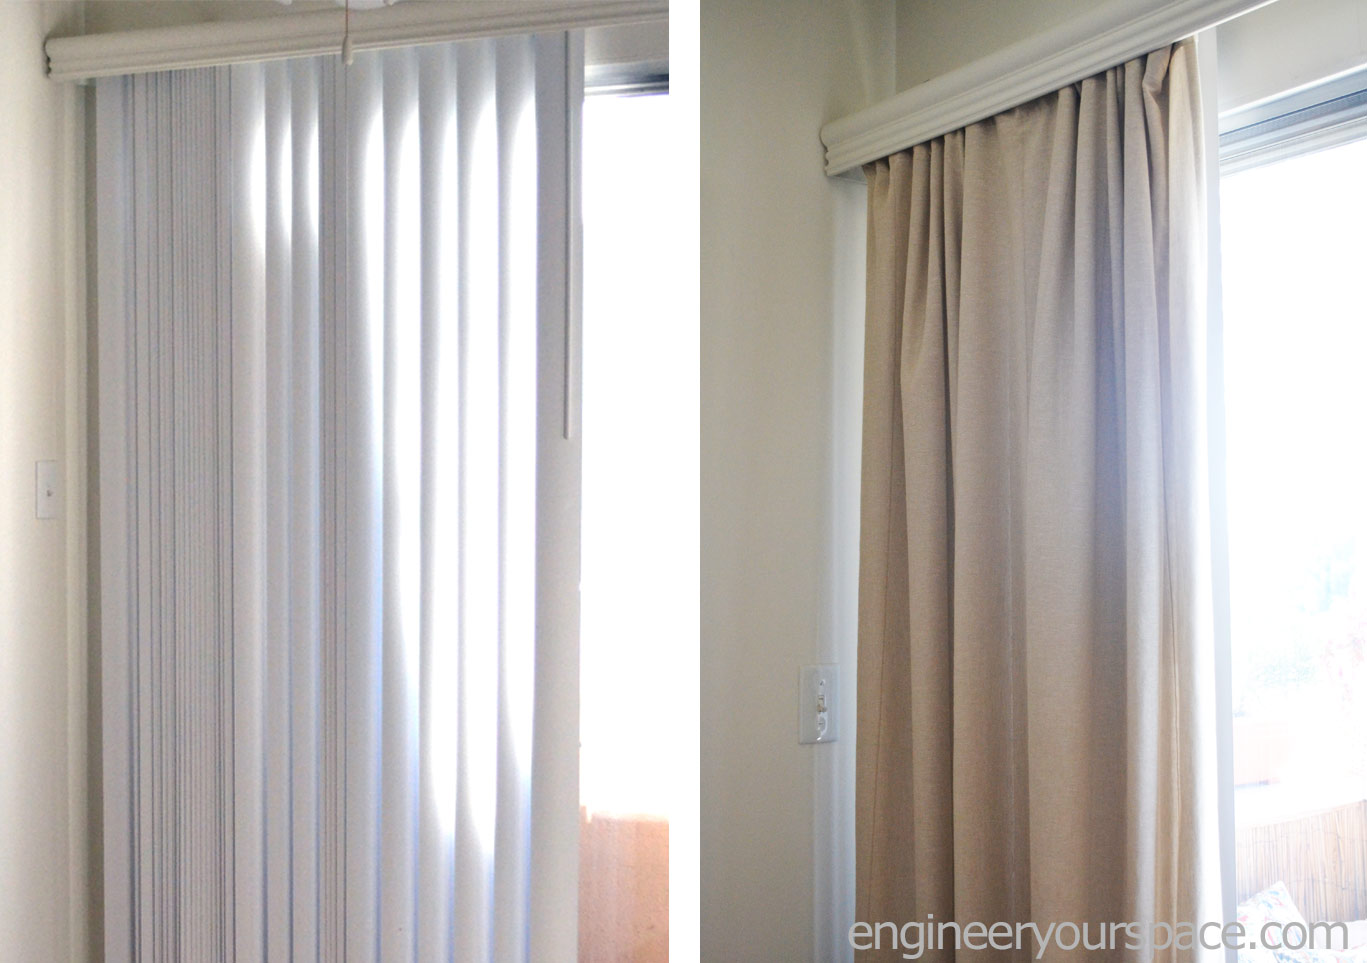 How to conceal vertical blinds with curtains   Engineer Your Space